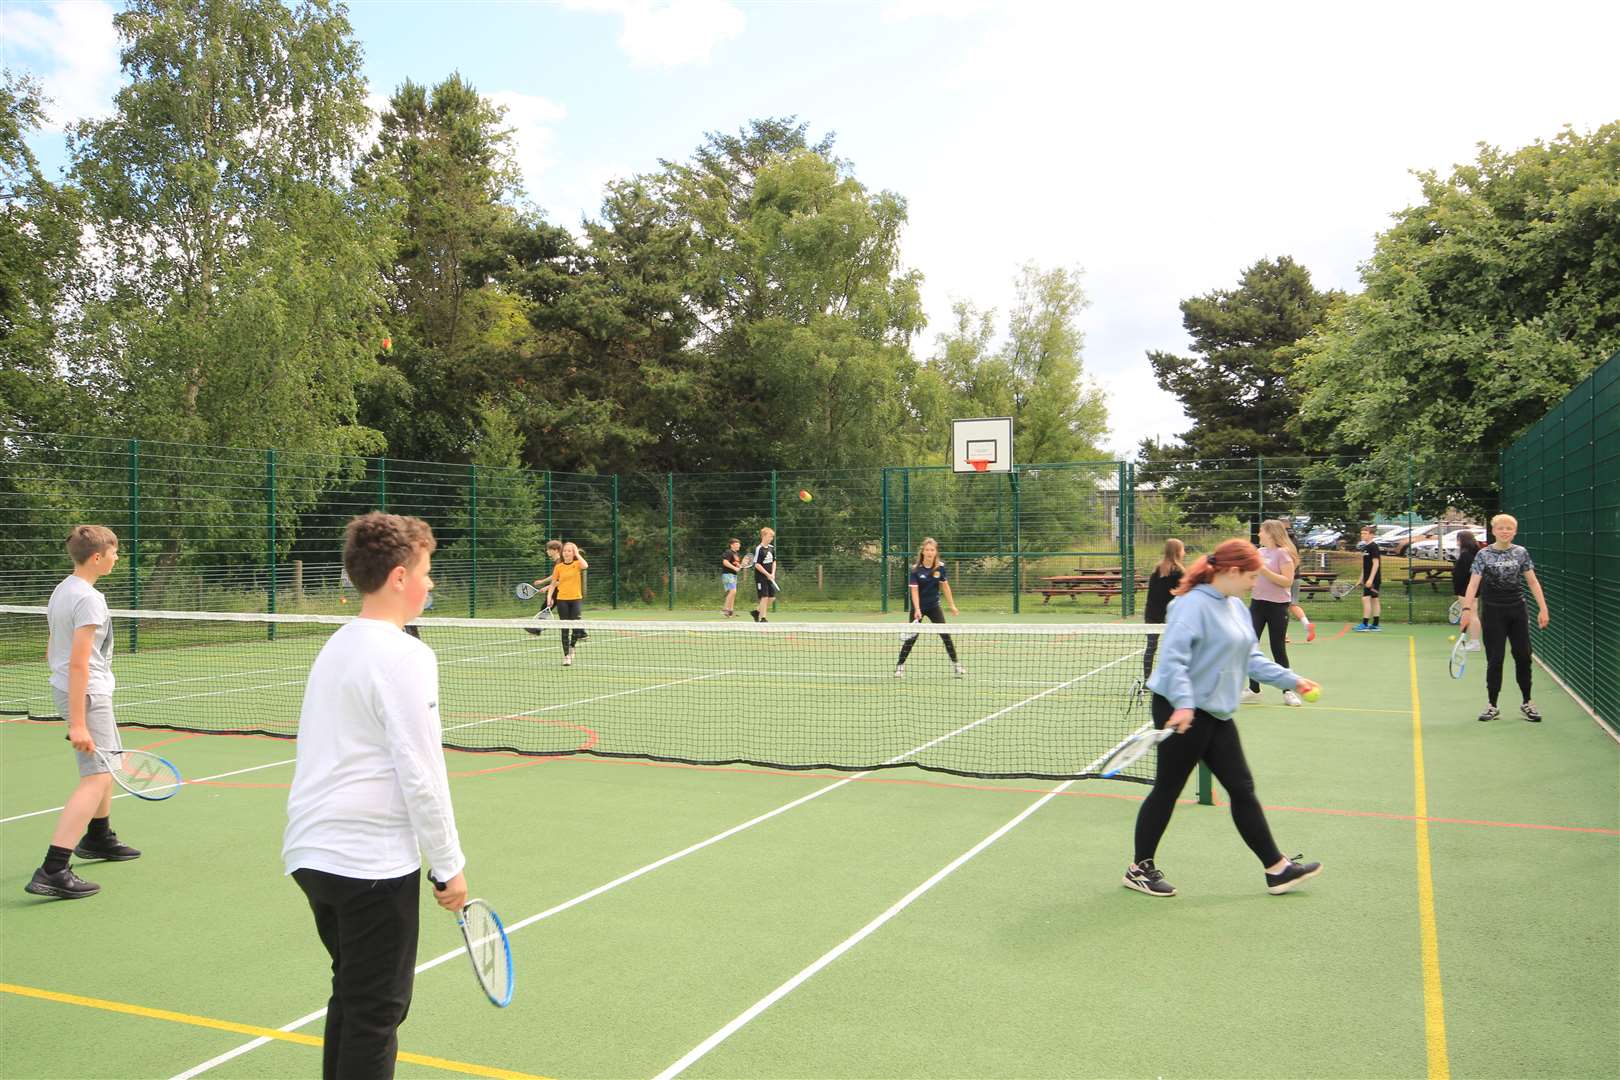 The MUGA has already been put to good use with pupils using it for football, basketball and tennis.